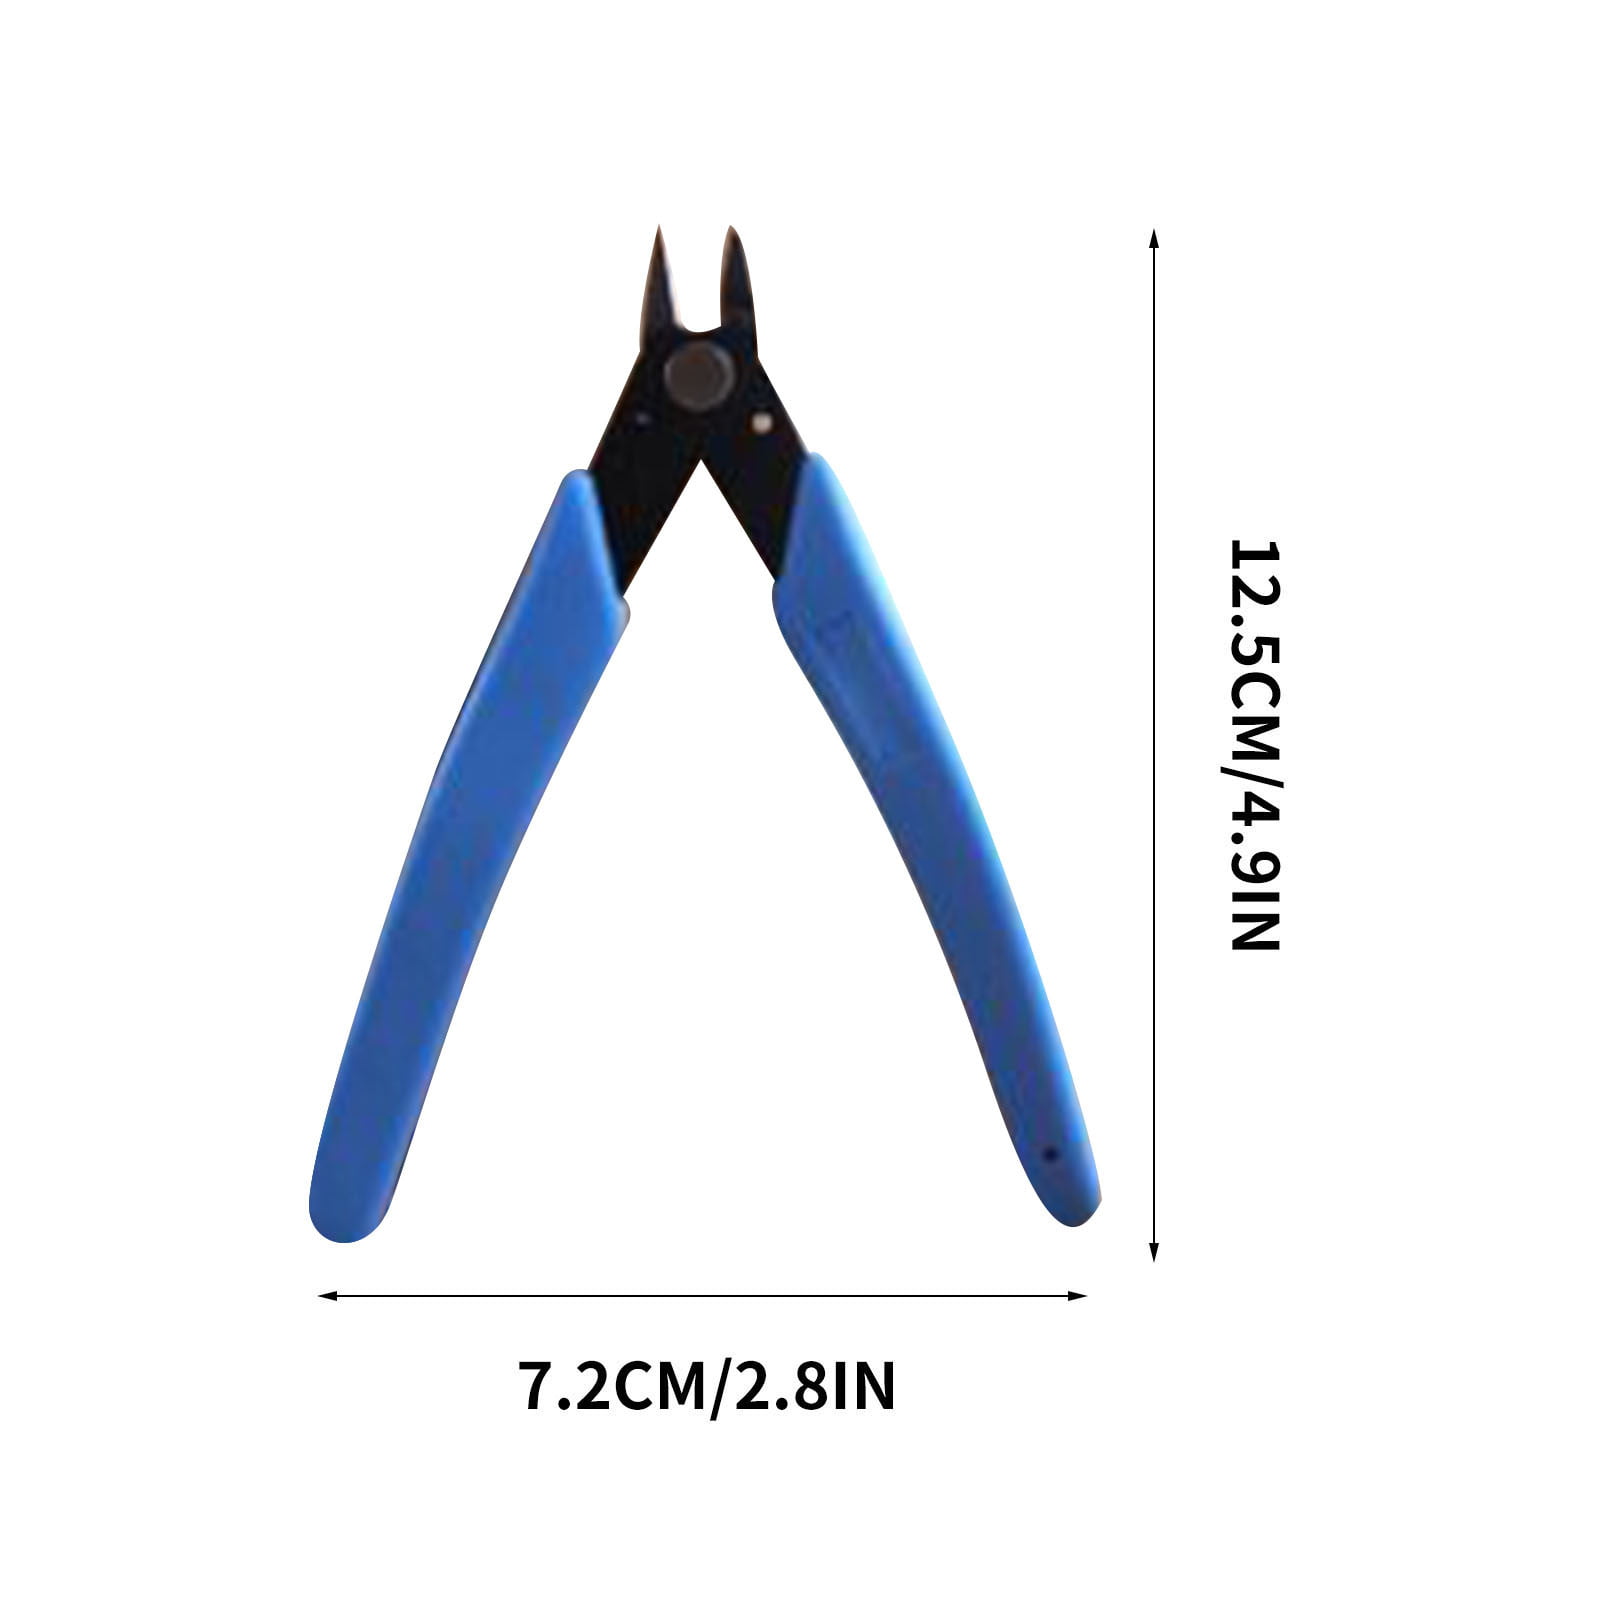 Thsue 5 Inch Side Cutting Nippers Wire Cutters Nozzle Pliers for